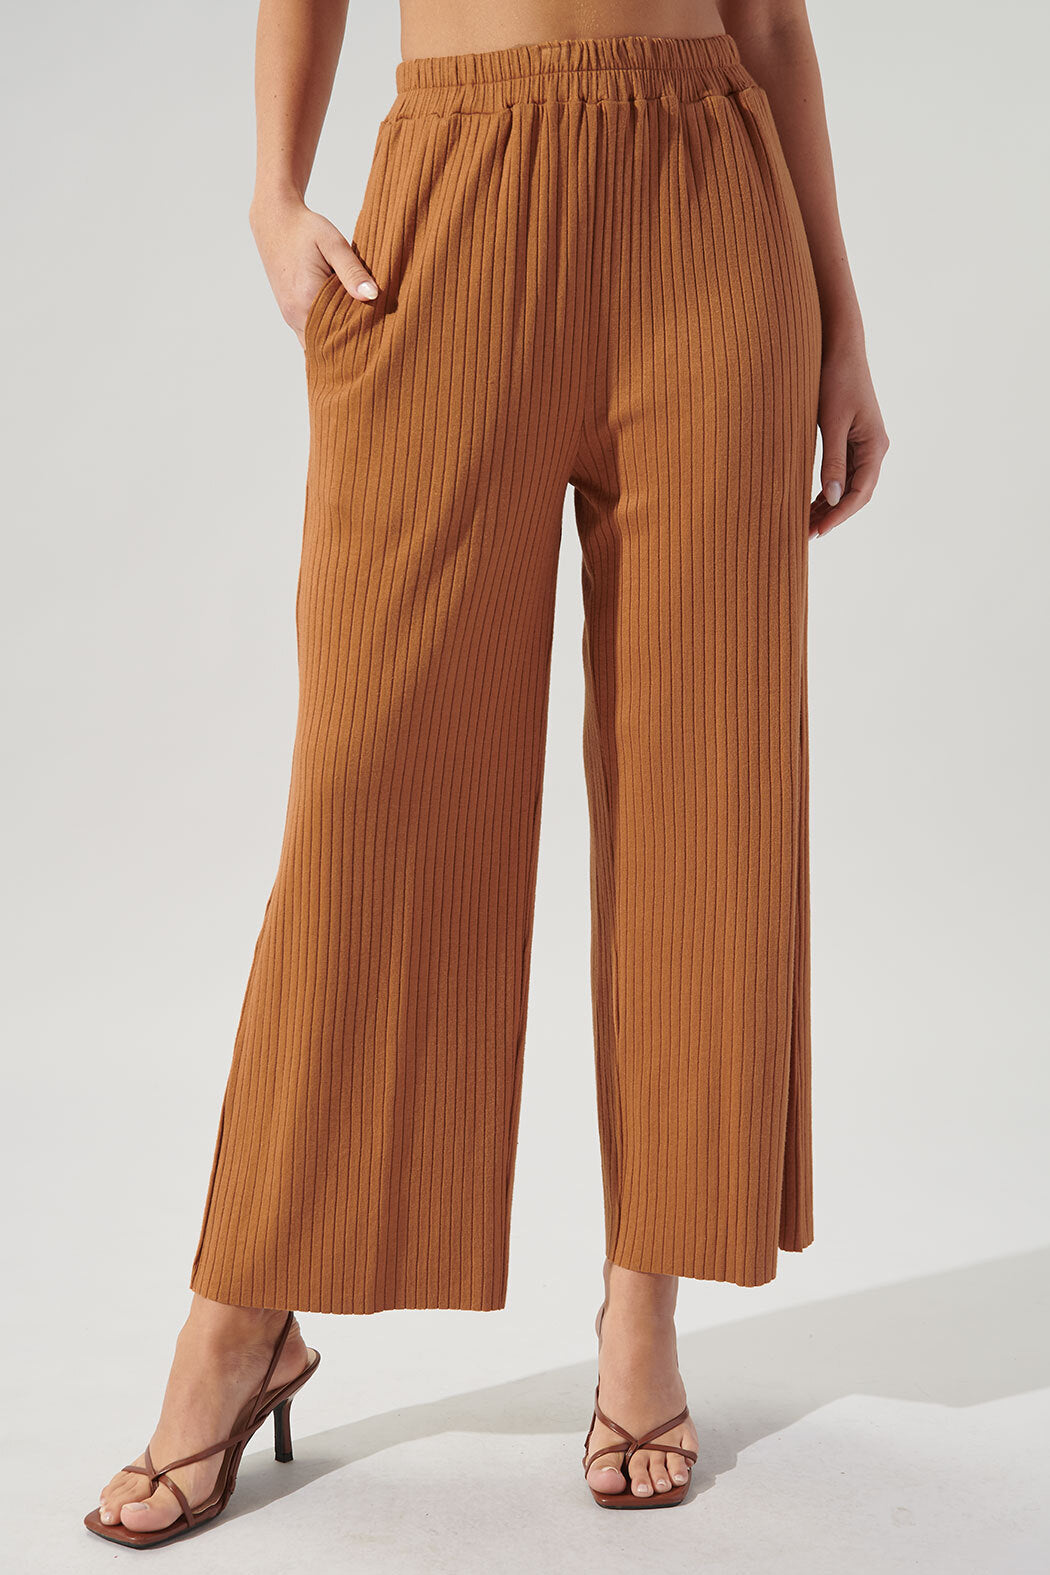 Rib knit jersey trousers Color nude  RESERVED  2459P02M